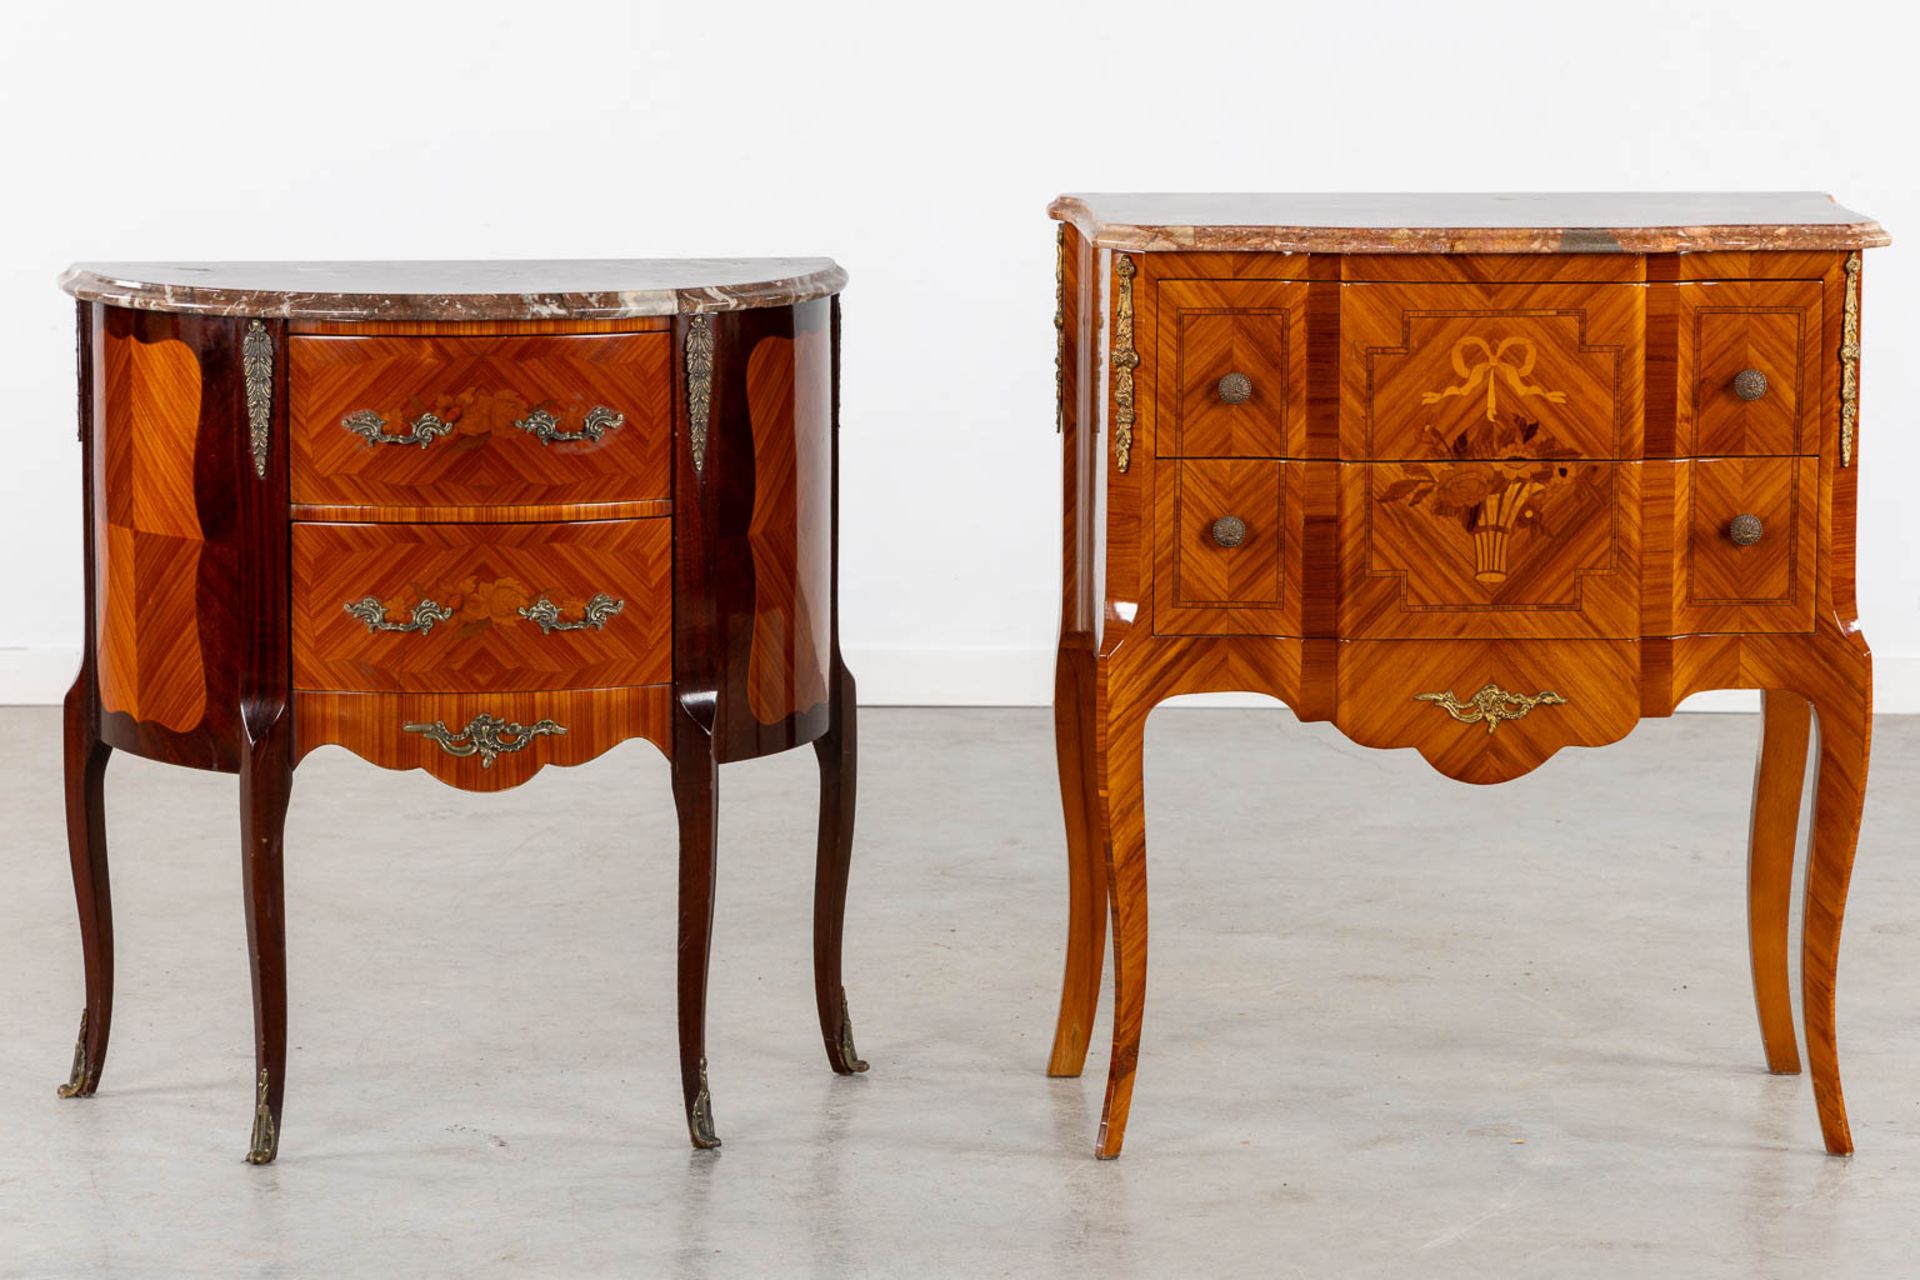 Two small cabinets with drawers, marquetry inlay and a marble top. 20th C. (L:39 x W:70 x H:80 cm) - Bild 4 aus 11